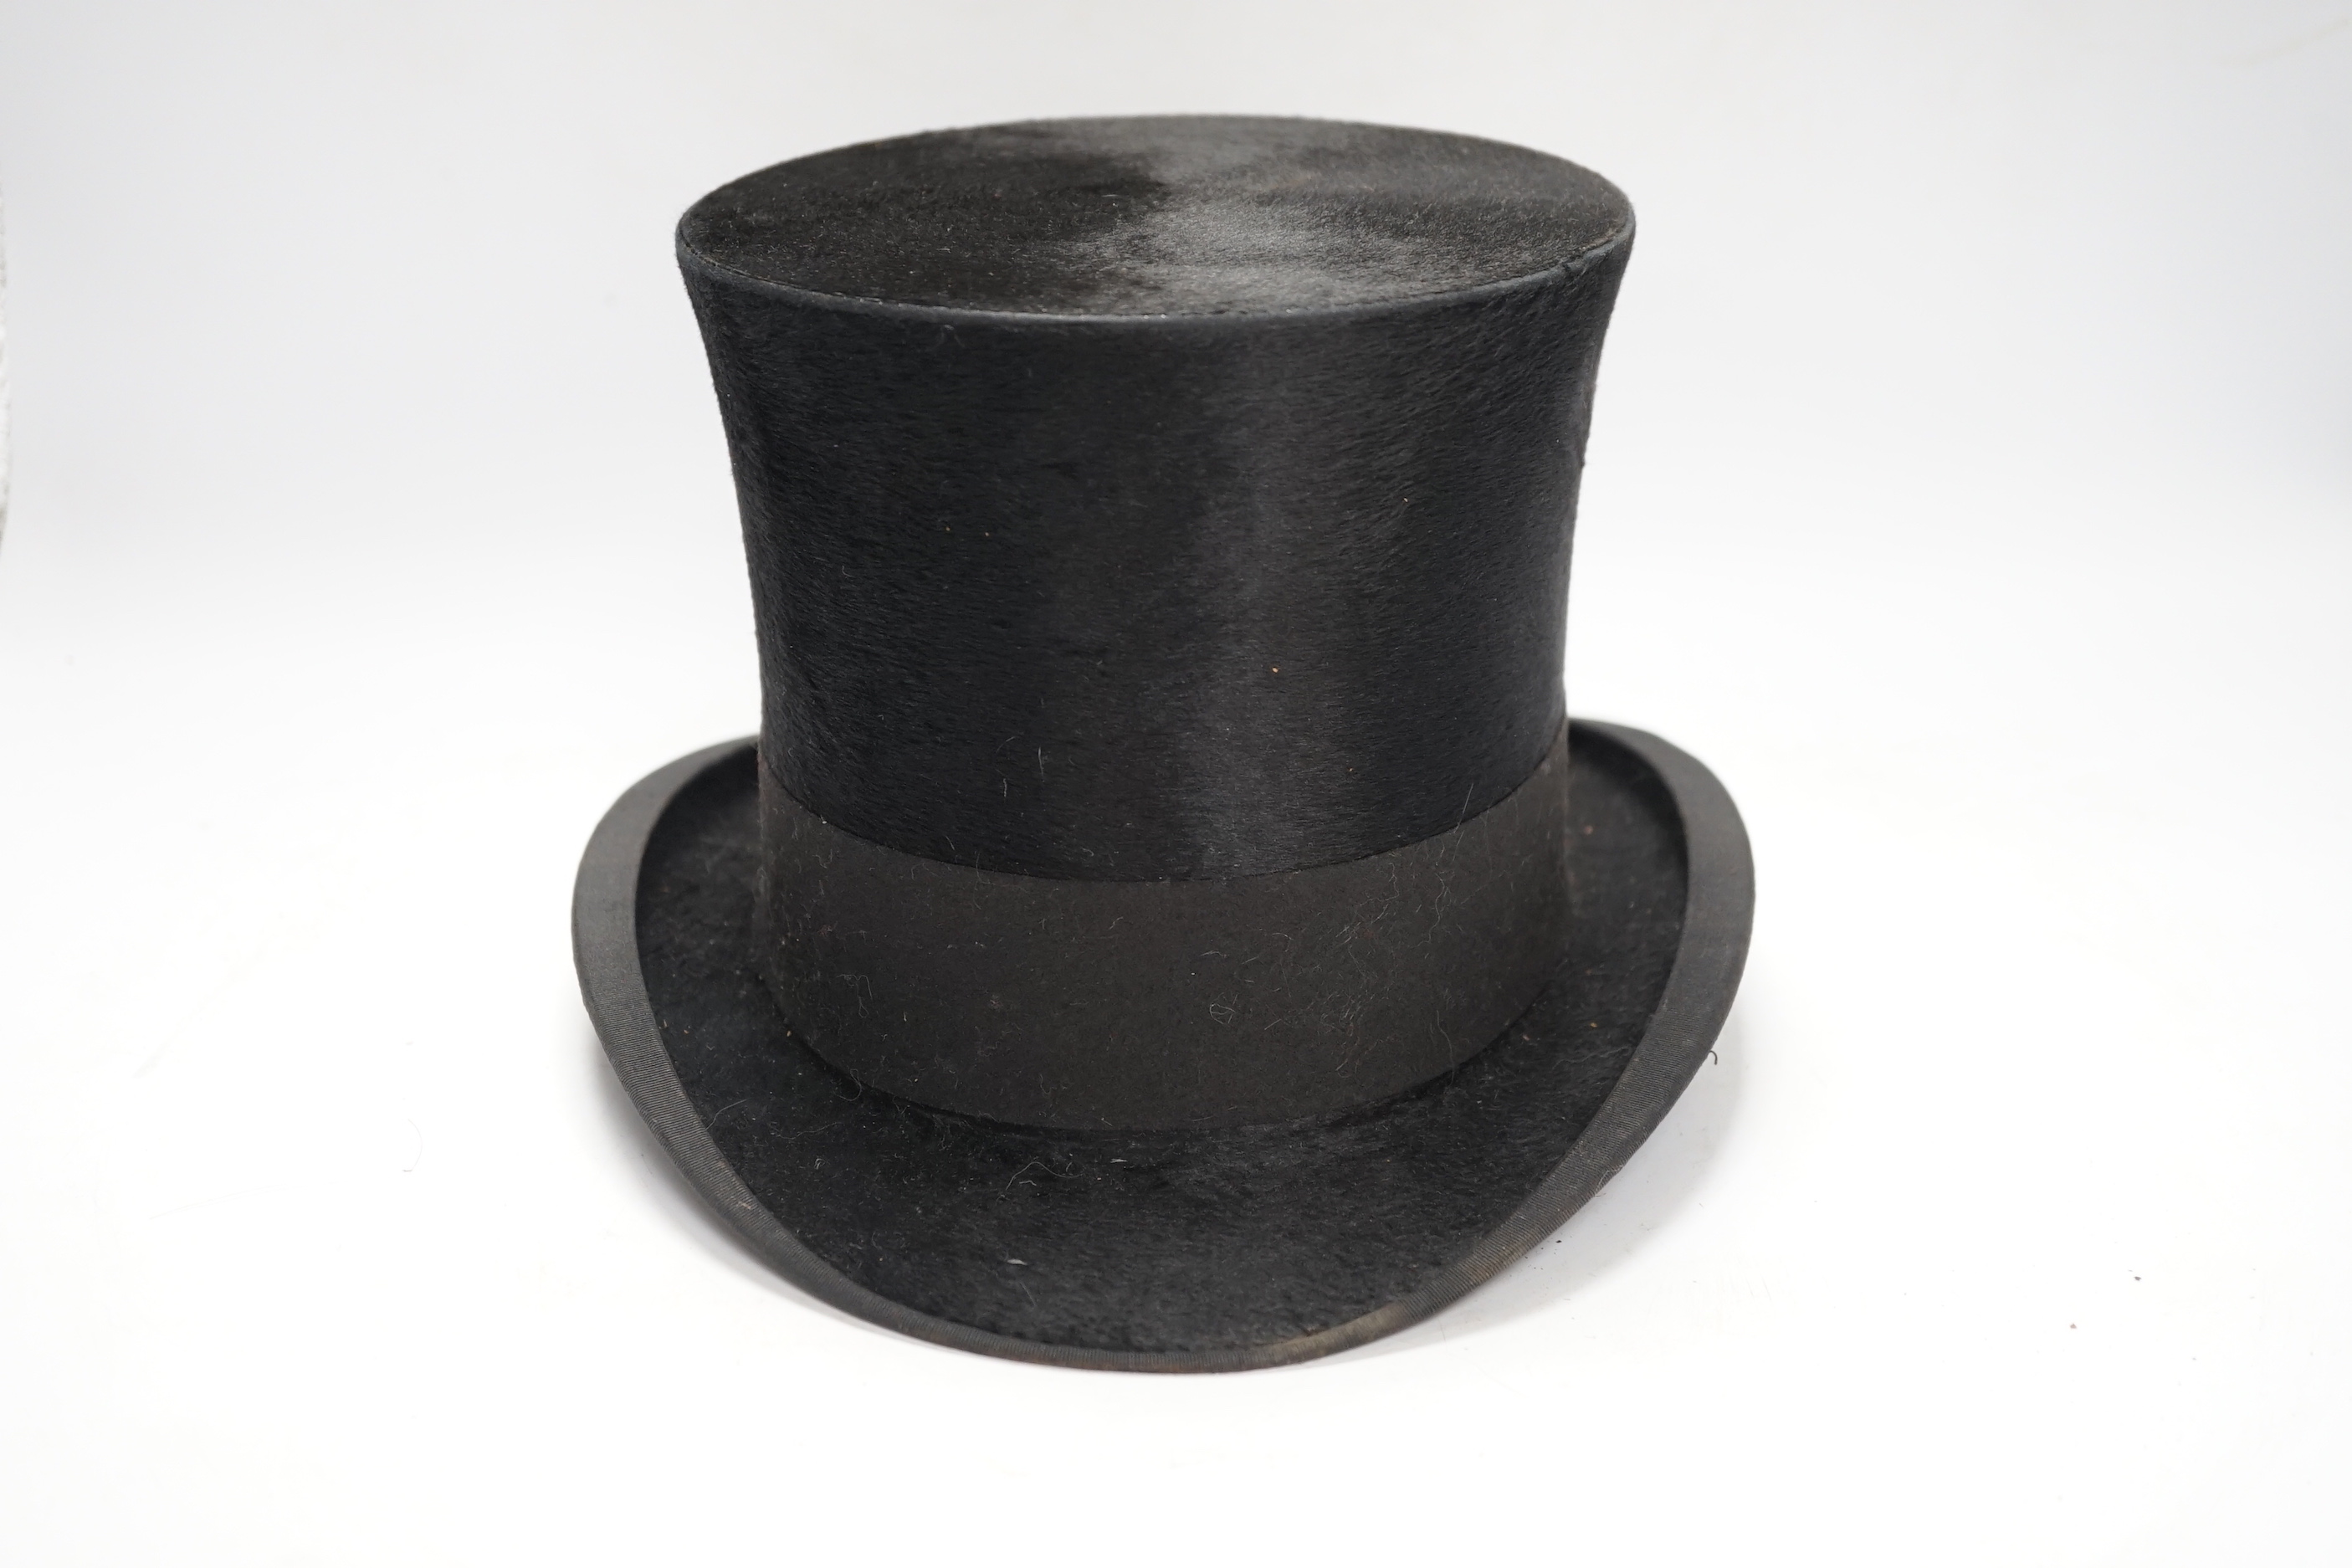 A top hat, in leather case